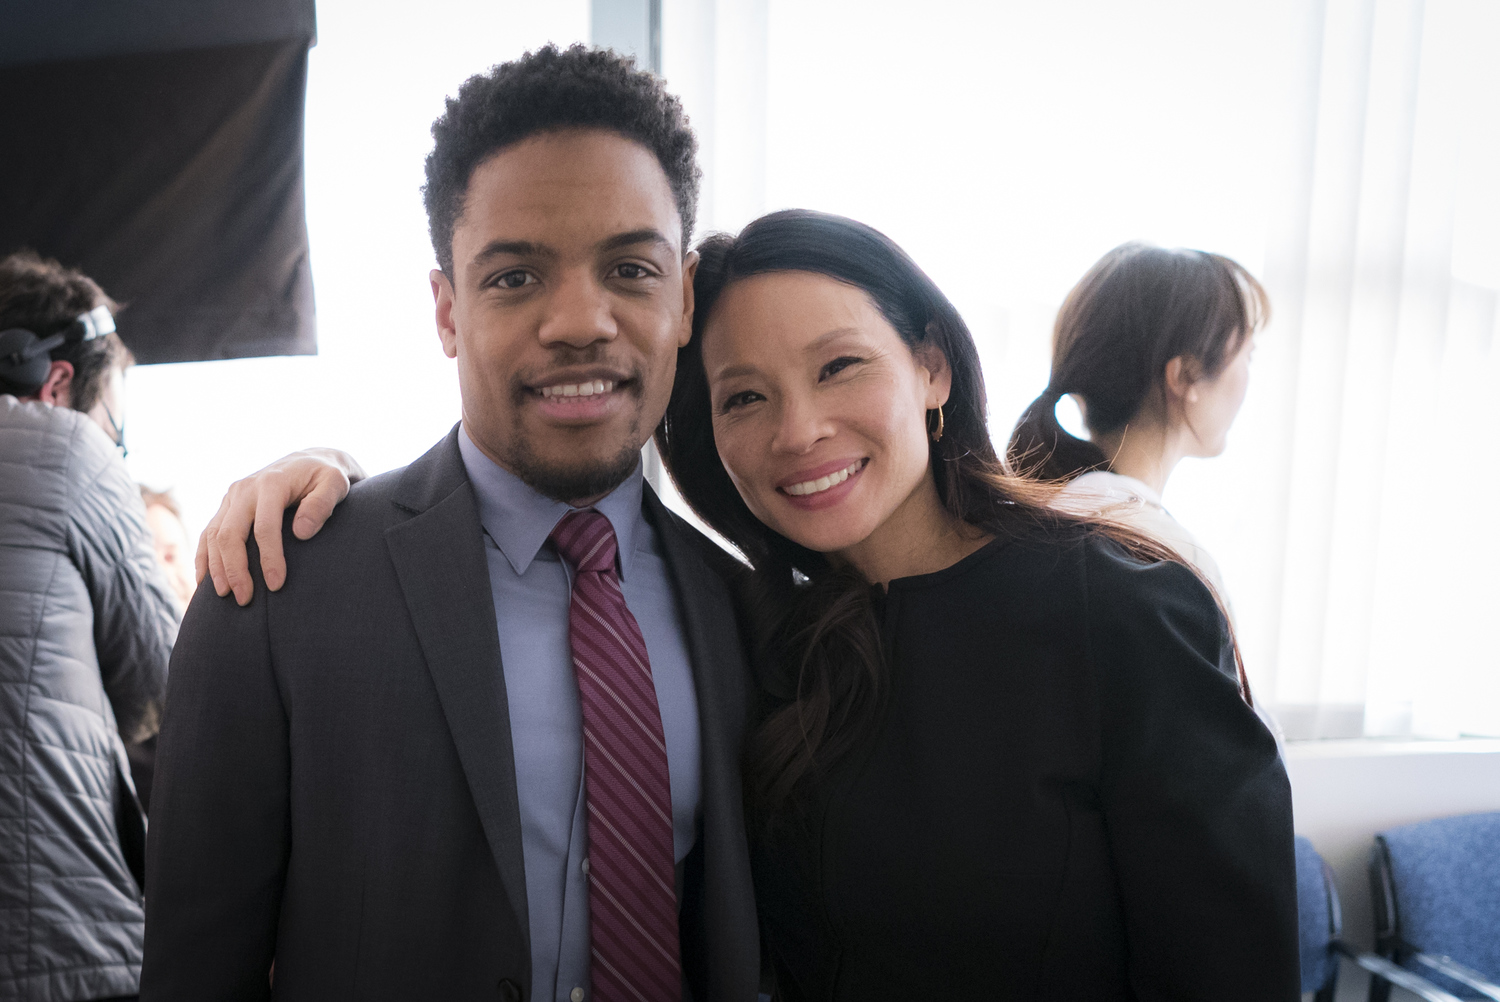 Jon Michael Hill poses with his castmate—and boss for the week!